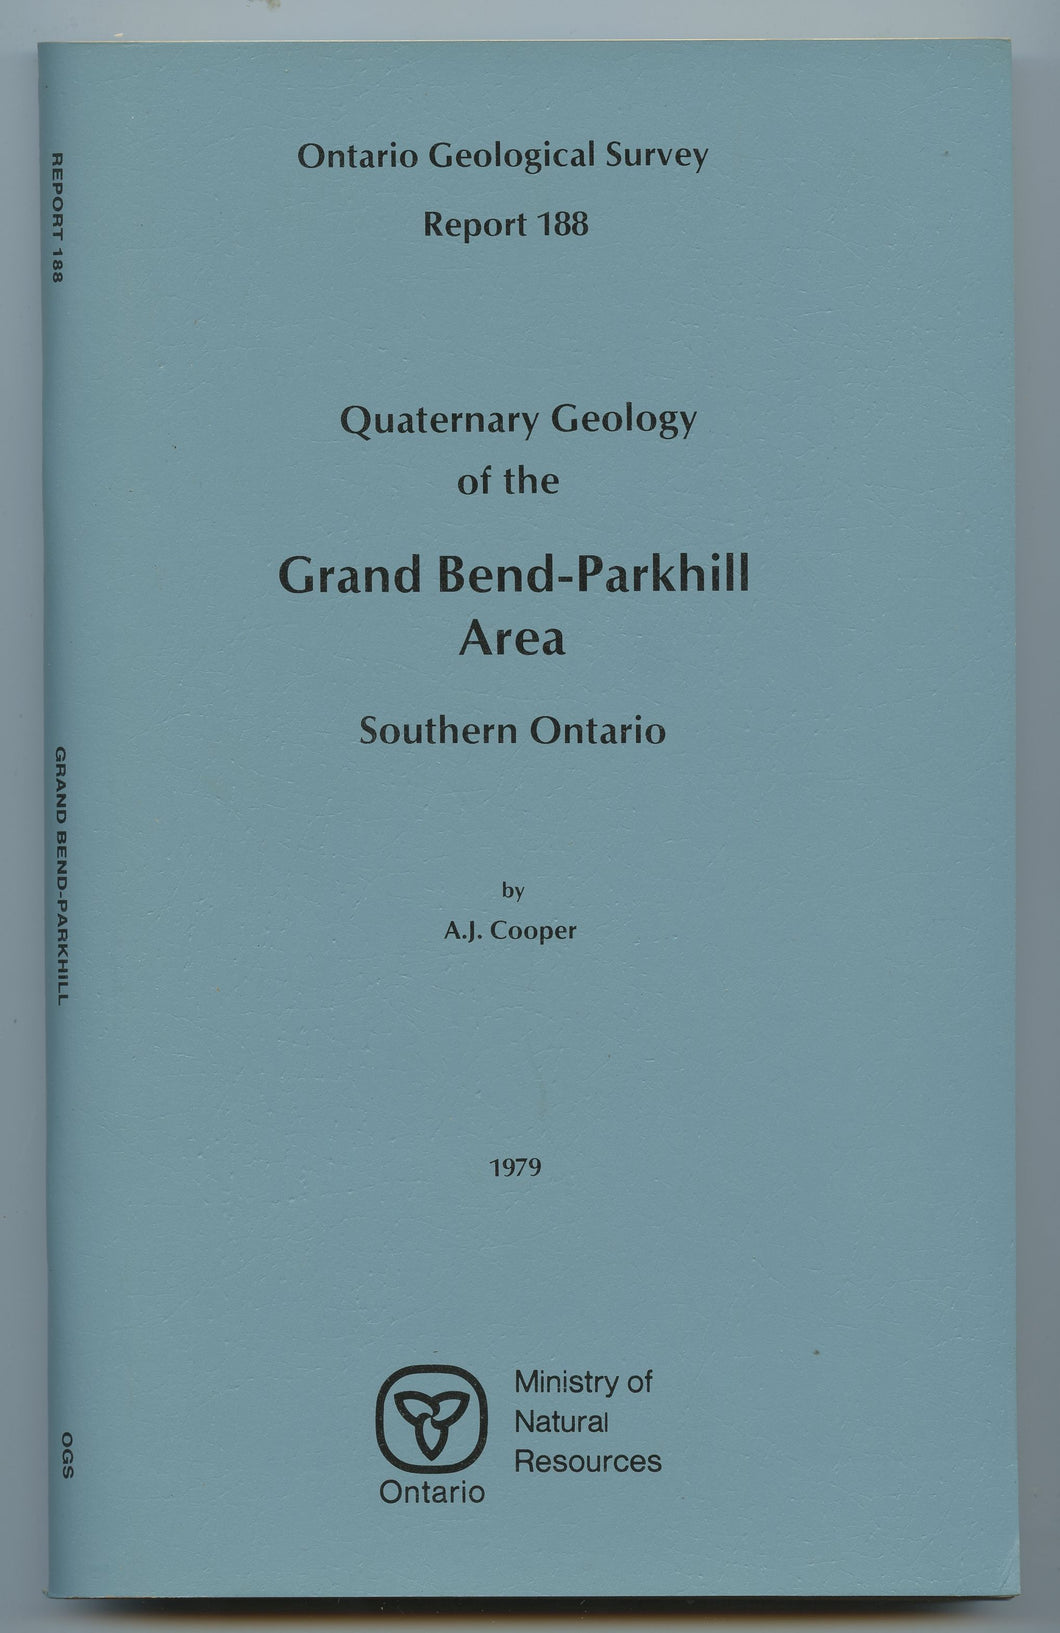 Quaternary Geology of the Grand Bend-Parkhill Area, Southern Ontario